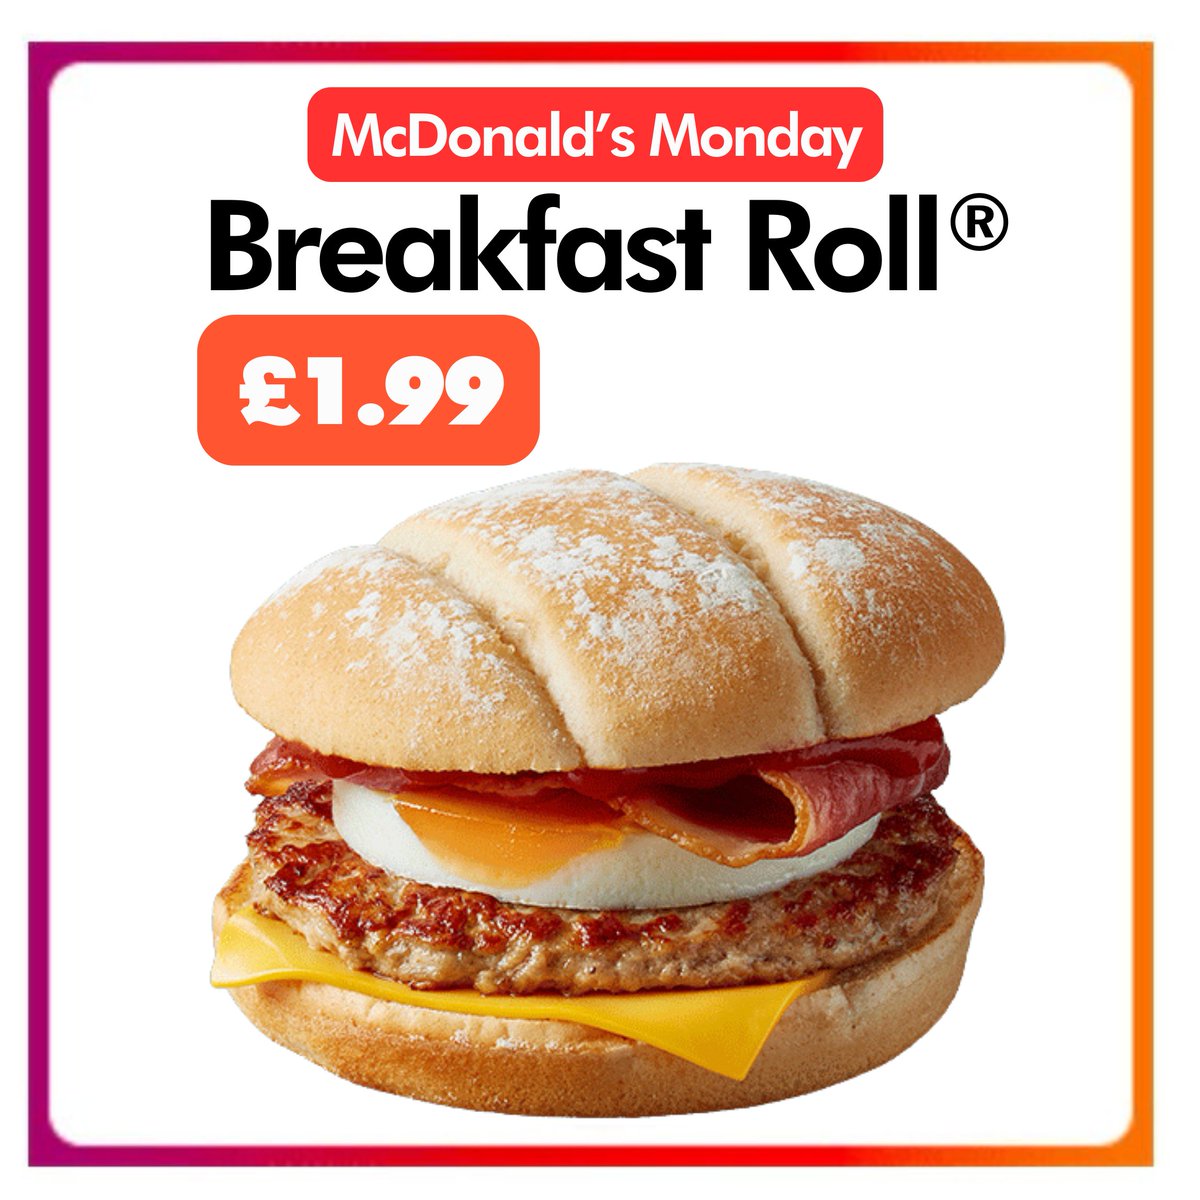 Make it a McDonald’s Monday with a Breakfast Roll for £1.99 Give yourself a little lift this Monday with our weekly offer – this week, get a Breakfast Roll for £1.99! Order now via the McDonald’s app. #Preston